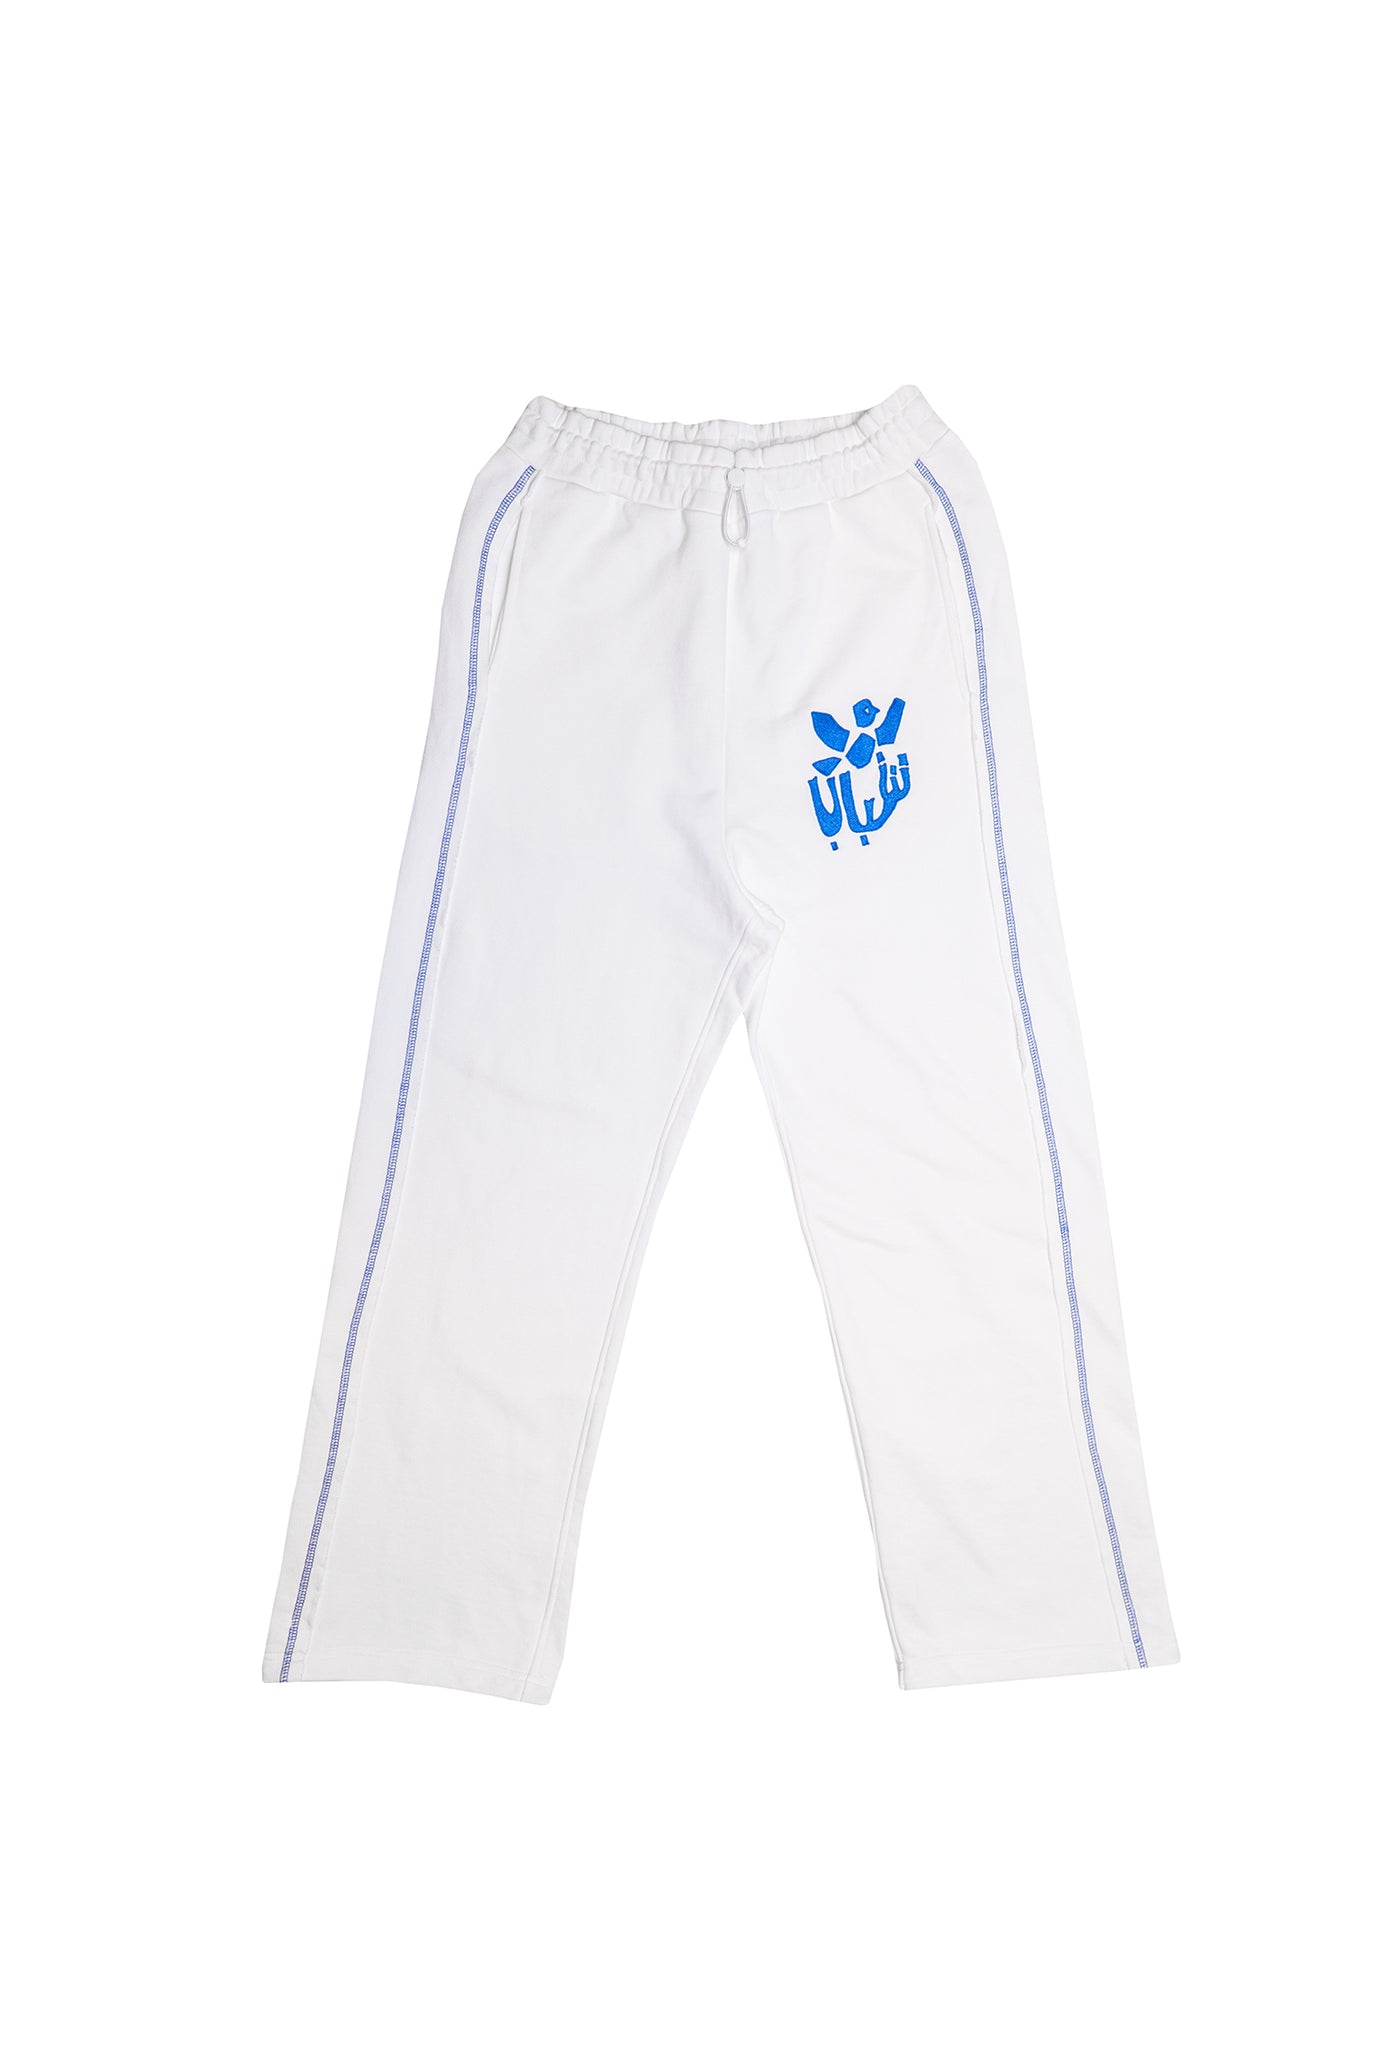 .FLY TO PARADISE SWEATPANTS